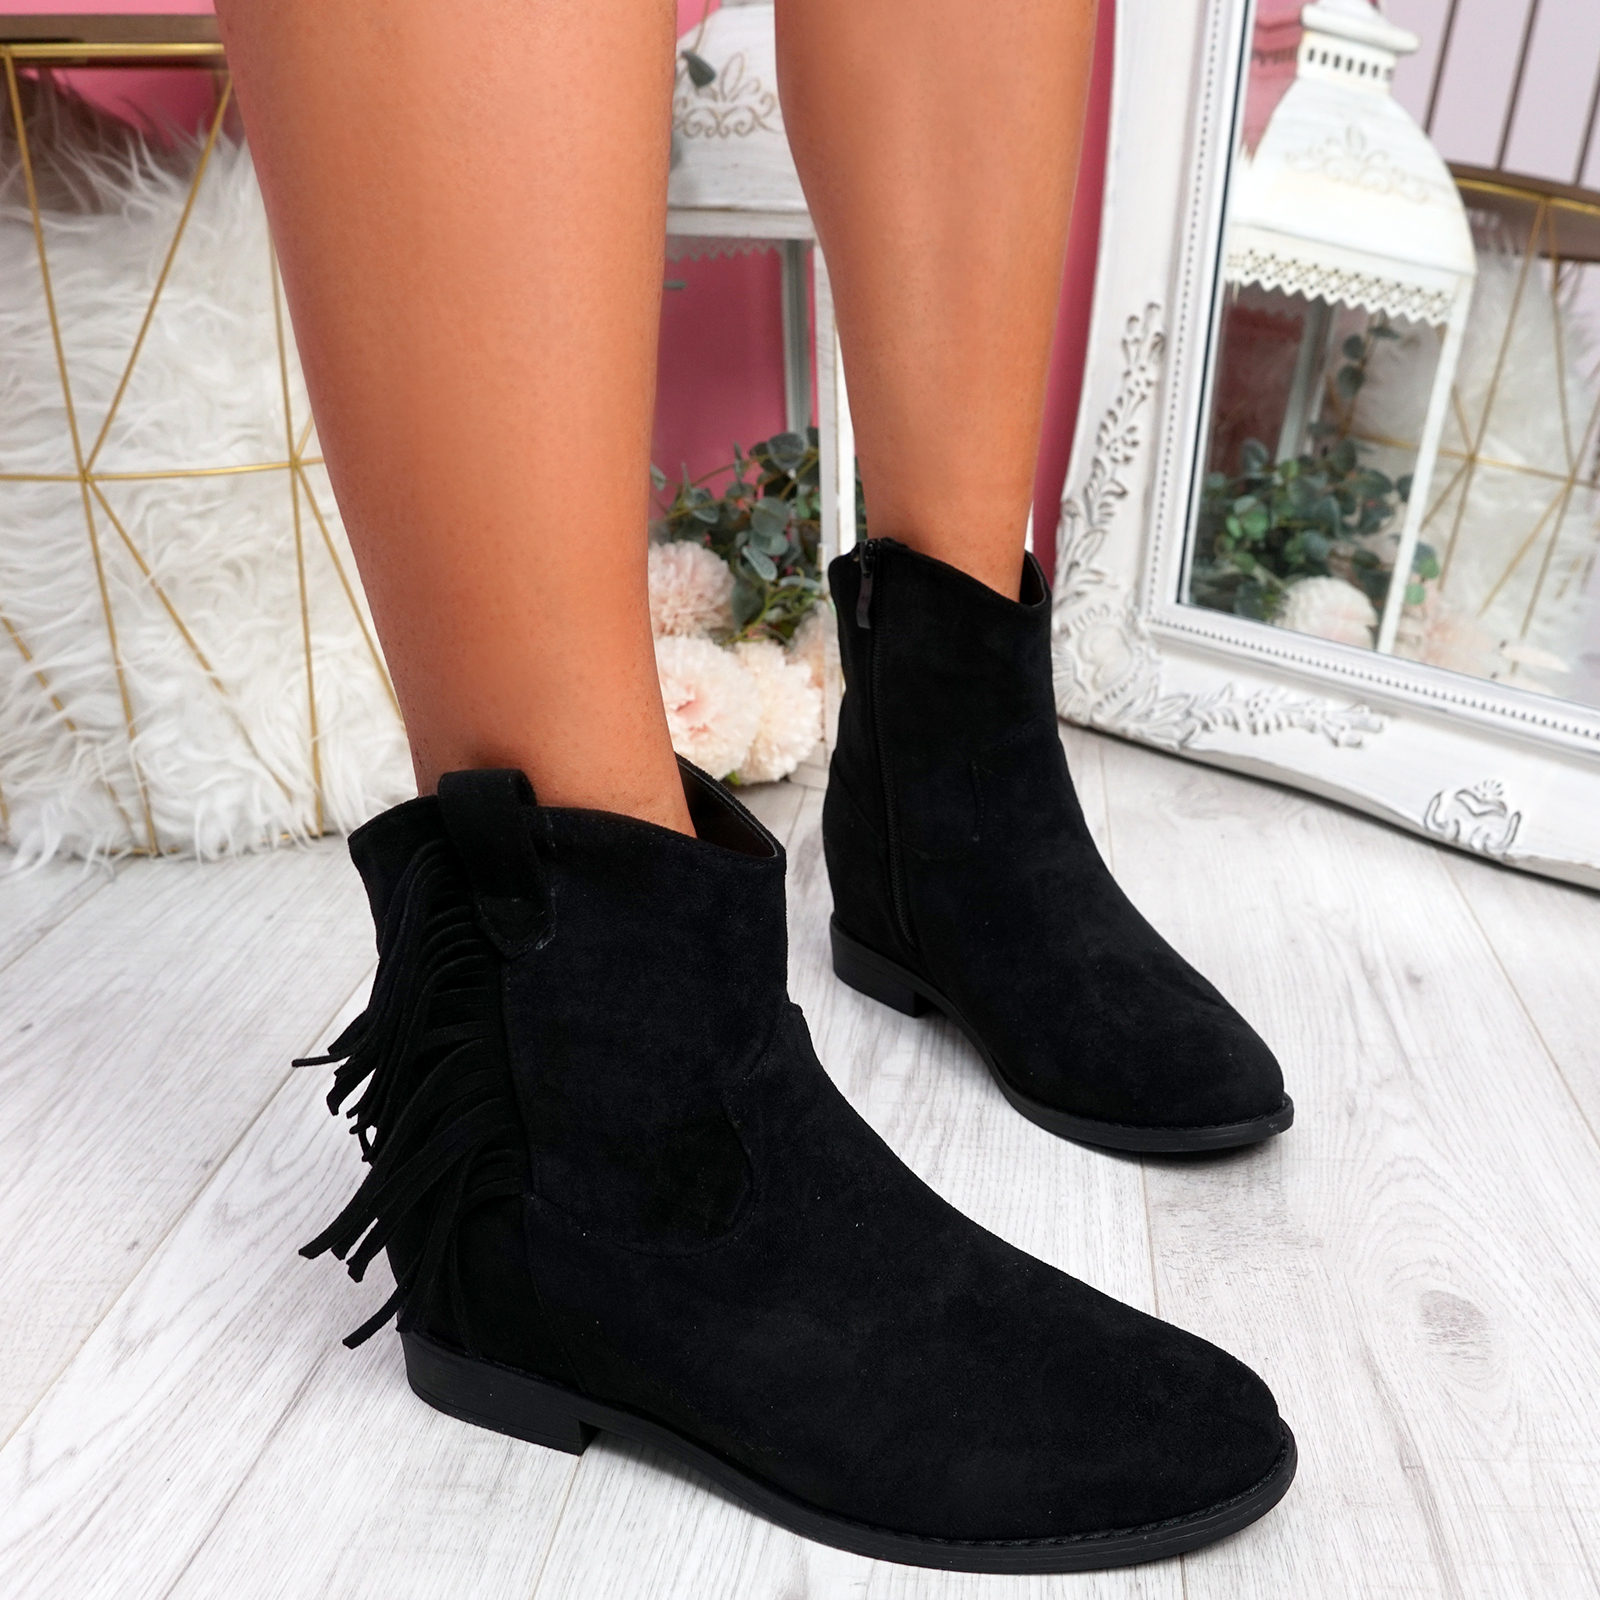 WOMENS LADIES SIDE ZIP FRINGE LOW HEEL ANKLE BOOTS FAUX SUEDE CASUAL ...